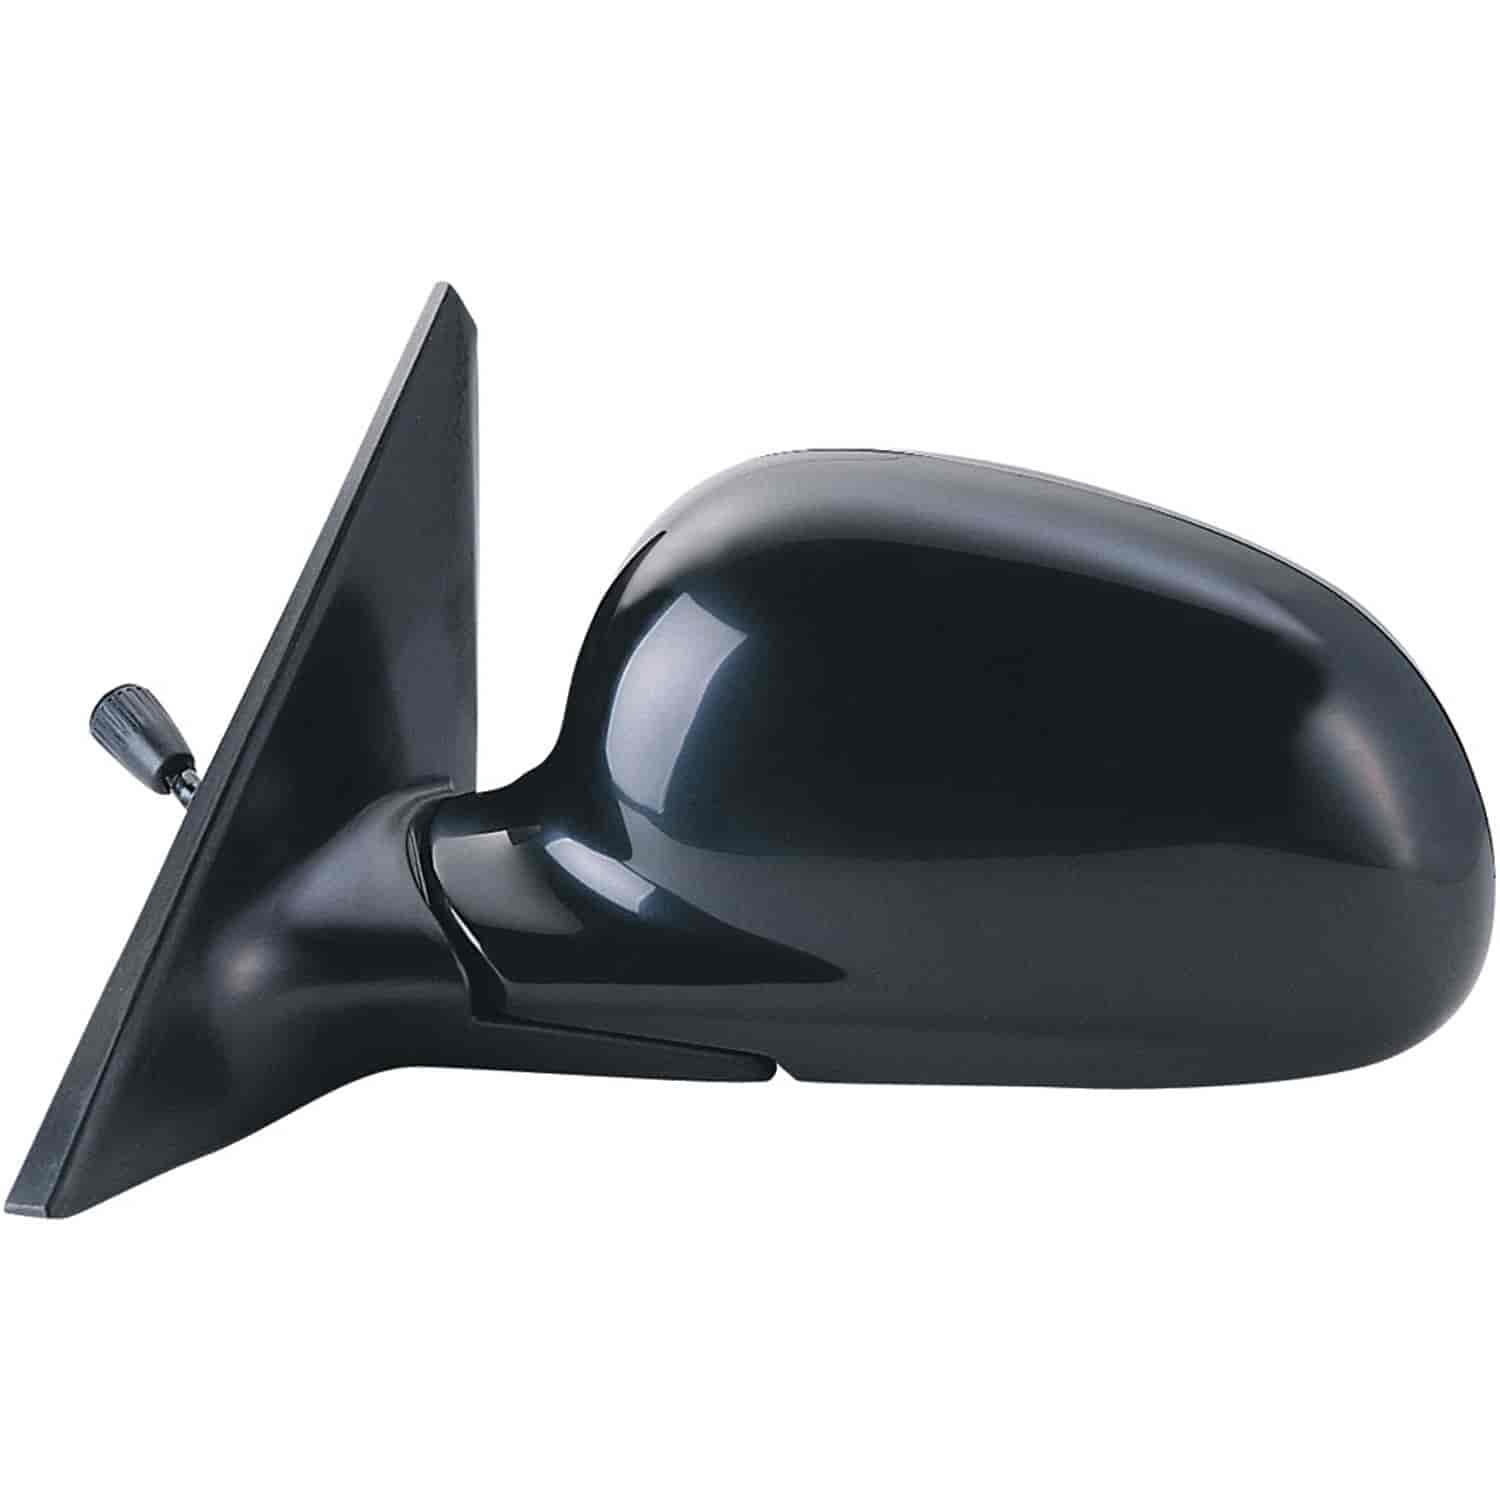 OEM Style Replacement mirror for 92-95 Honda Civic Sedan driver side mirror tested to fit and functi